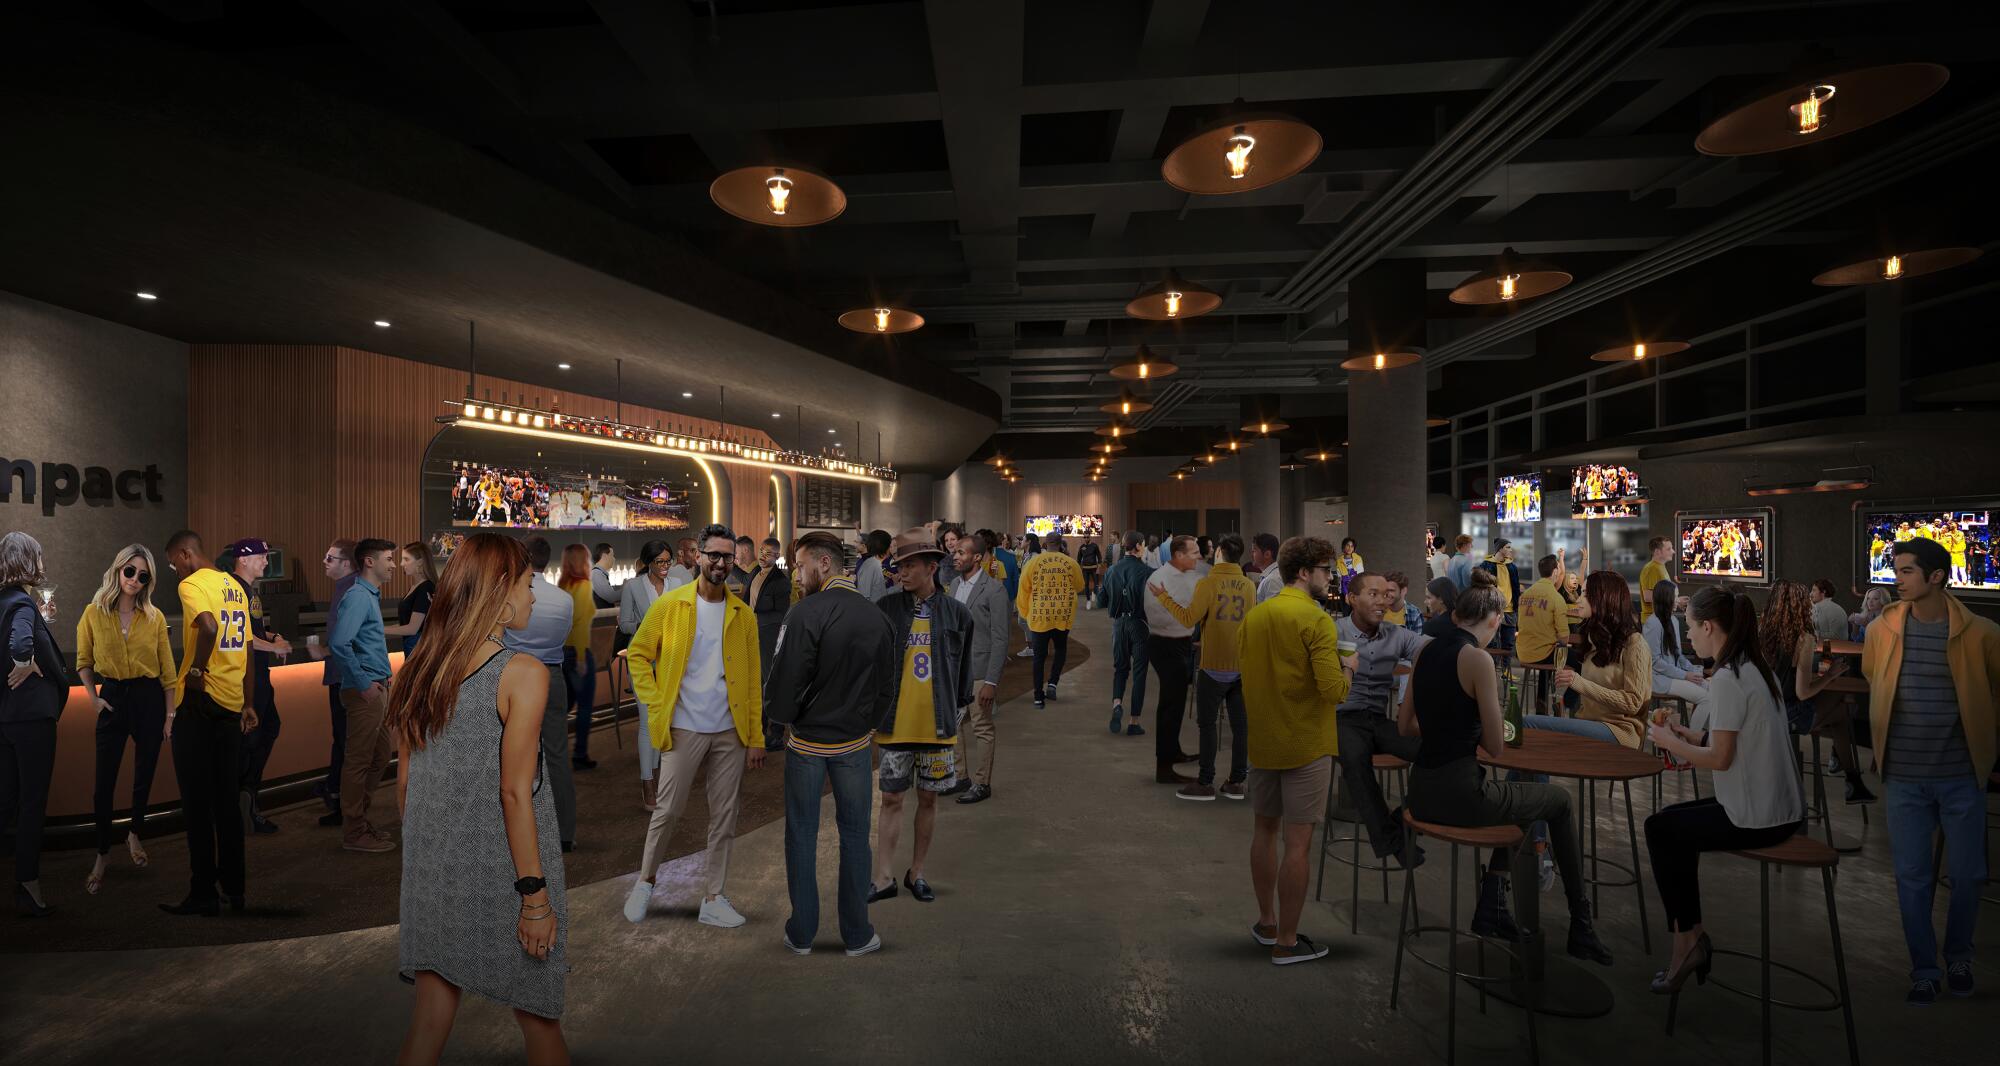 An artist's rendering of the redesigned Impact Sports Bar & Grill.